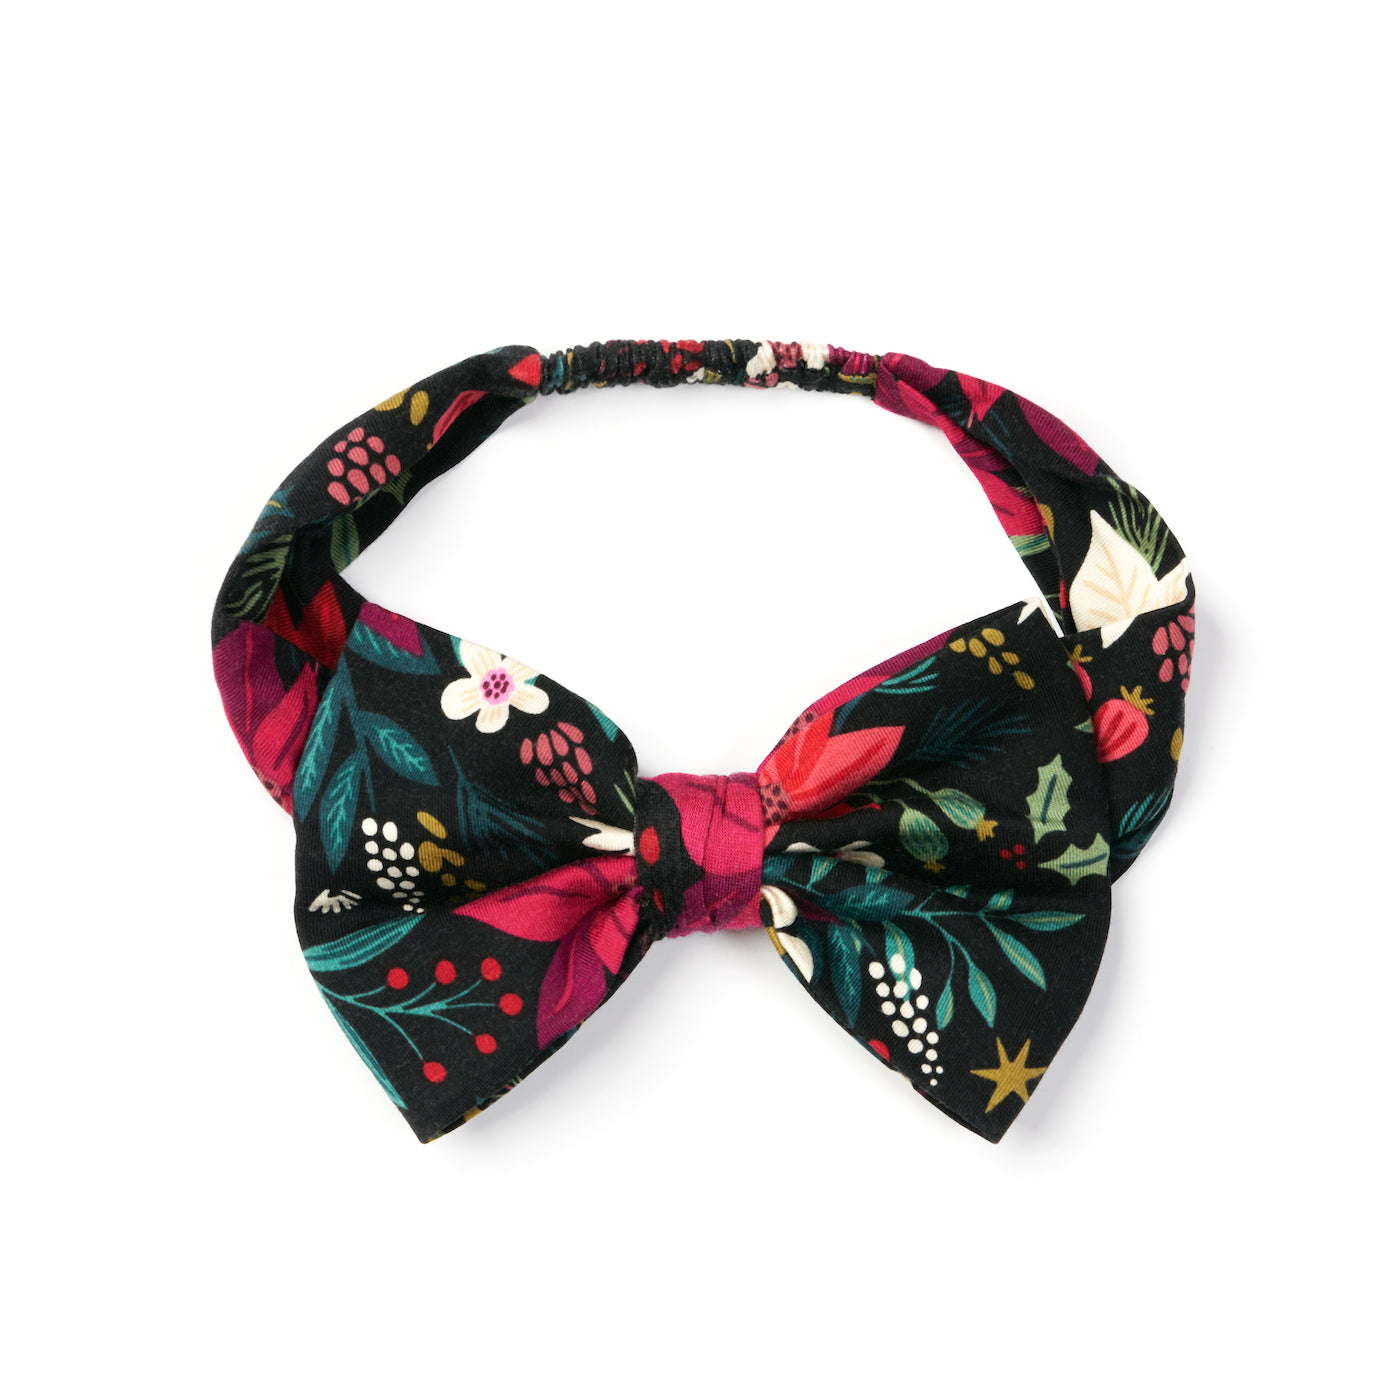 Flat lay image of Berry Merry luxe bow headband in size 4 years to 8 years